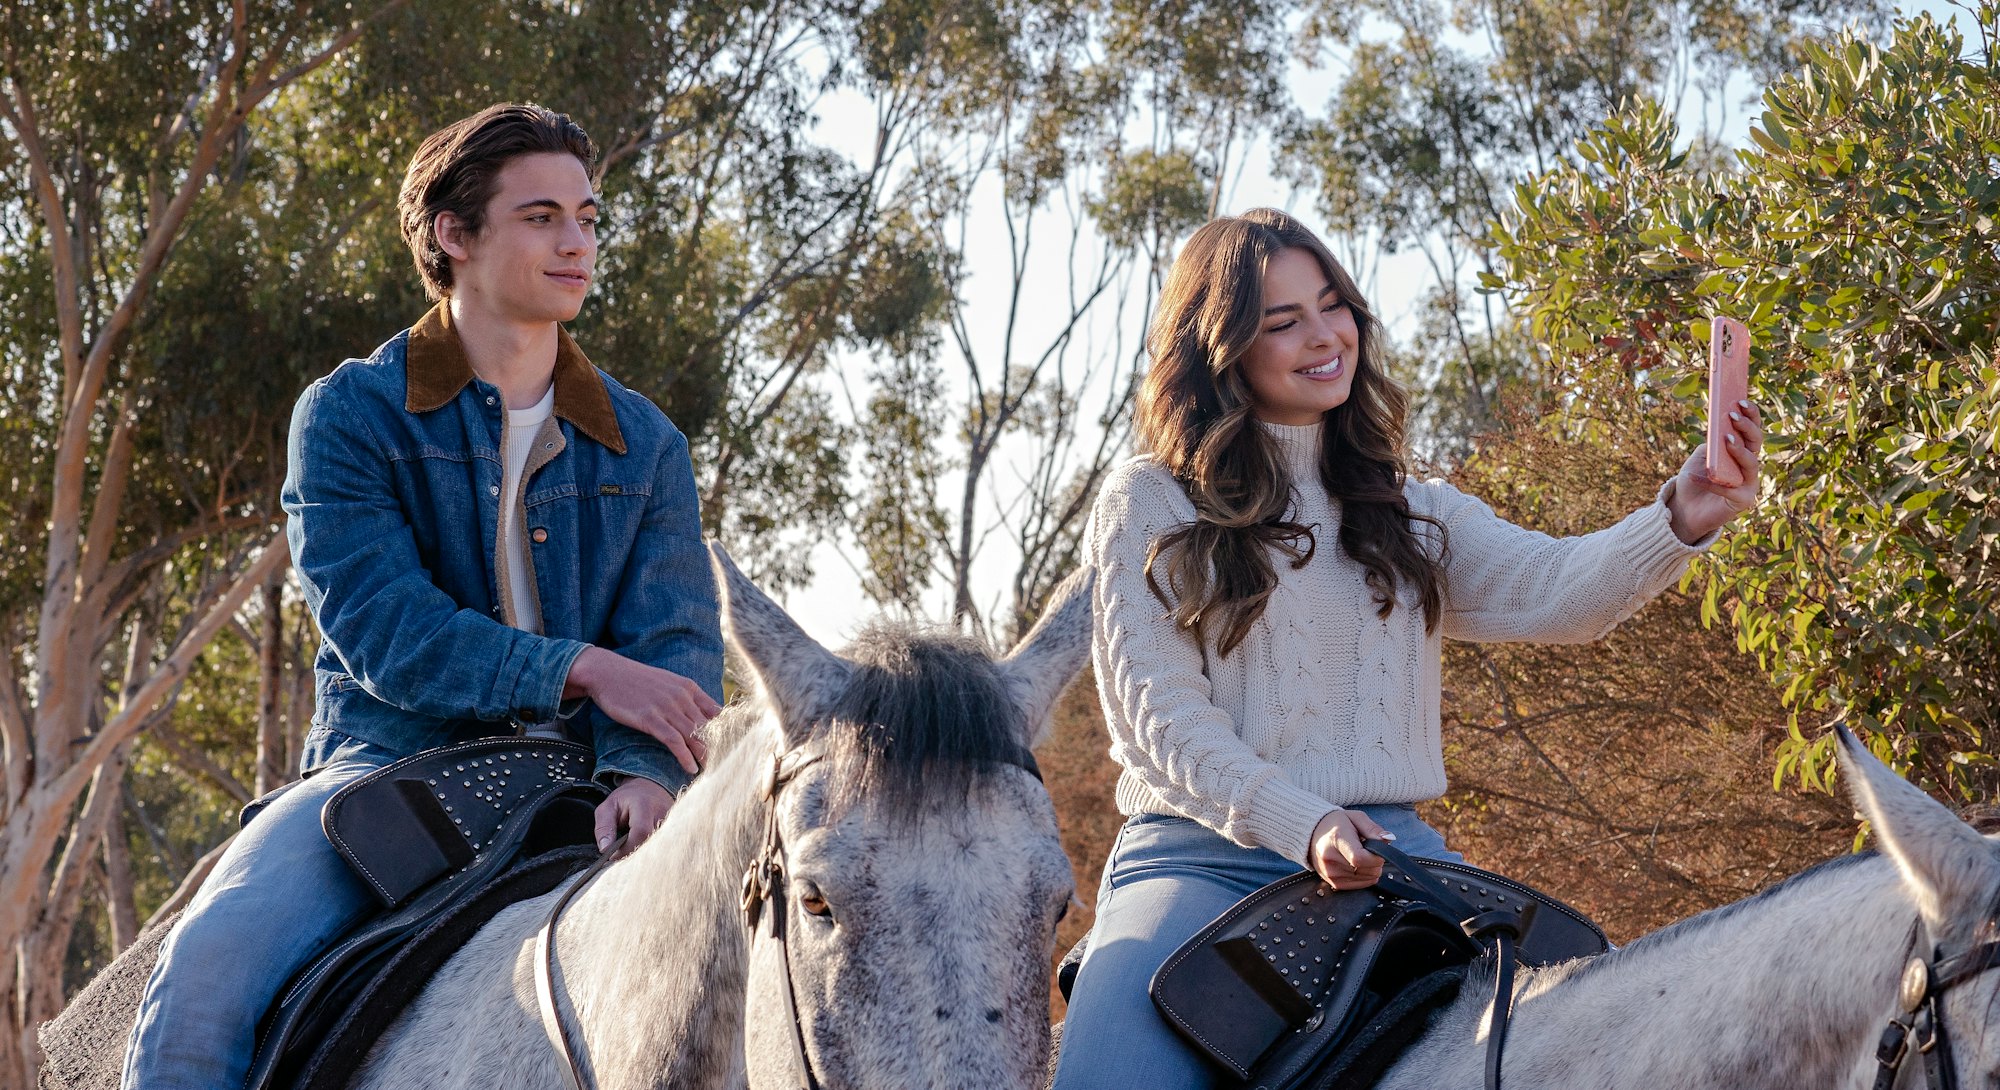 A still from He's All That: main characters Cameron and Padgett ride horses while Padgett snaps a se...